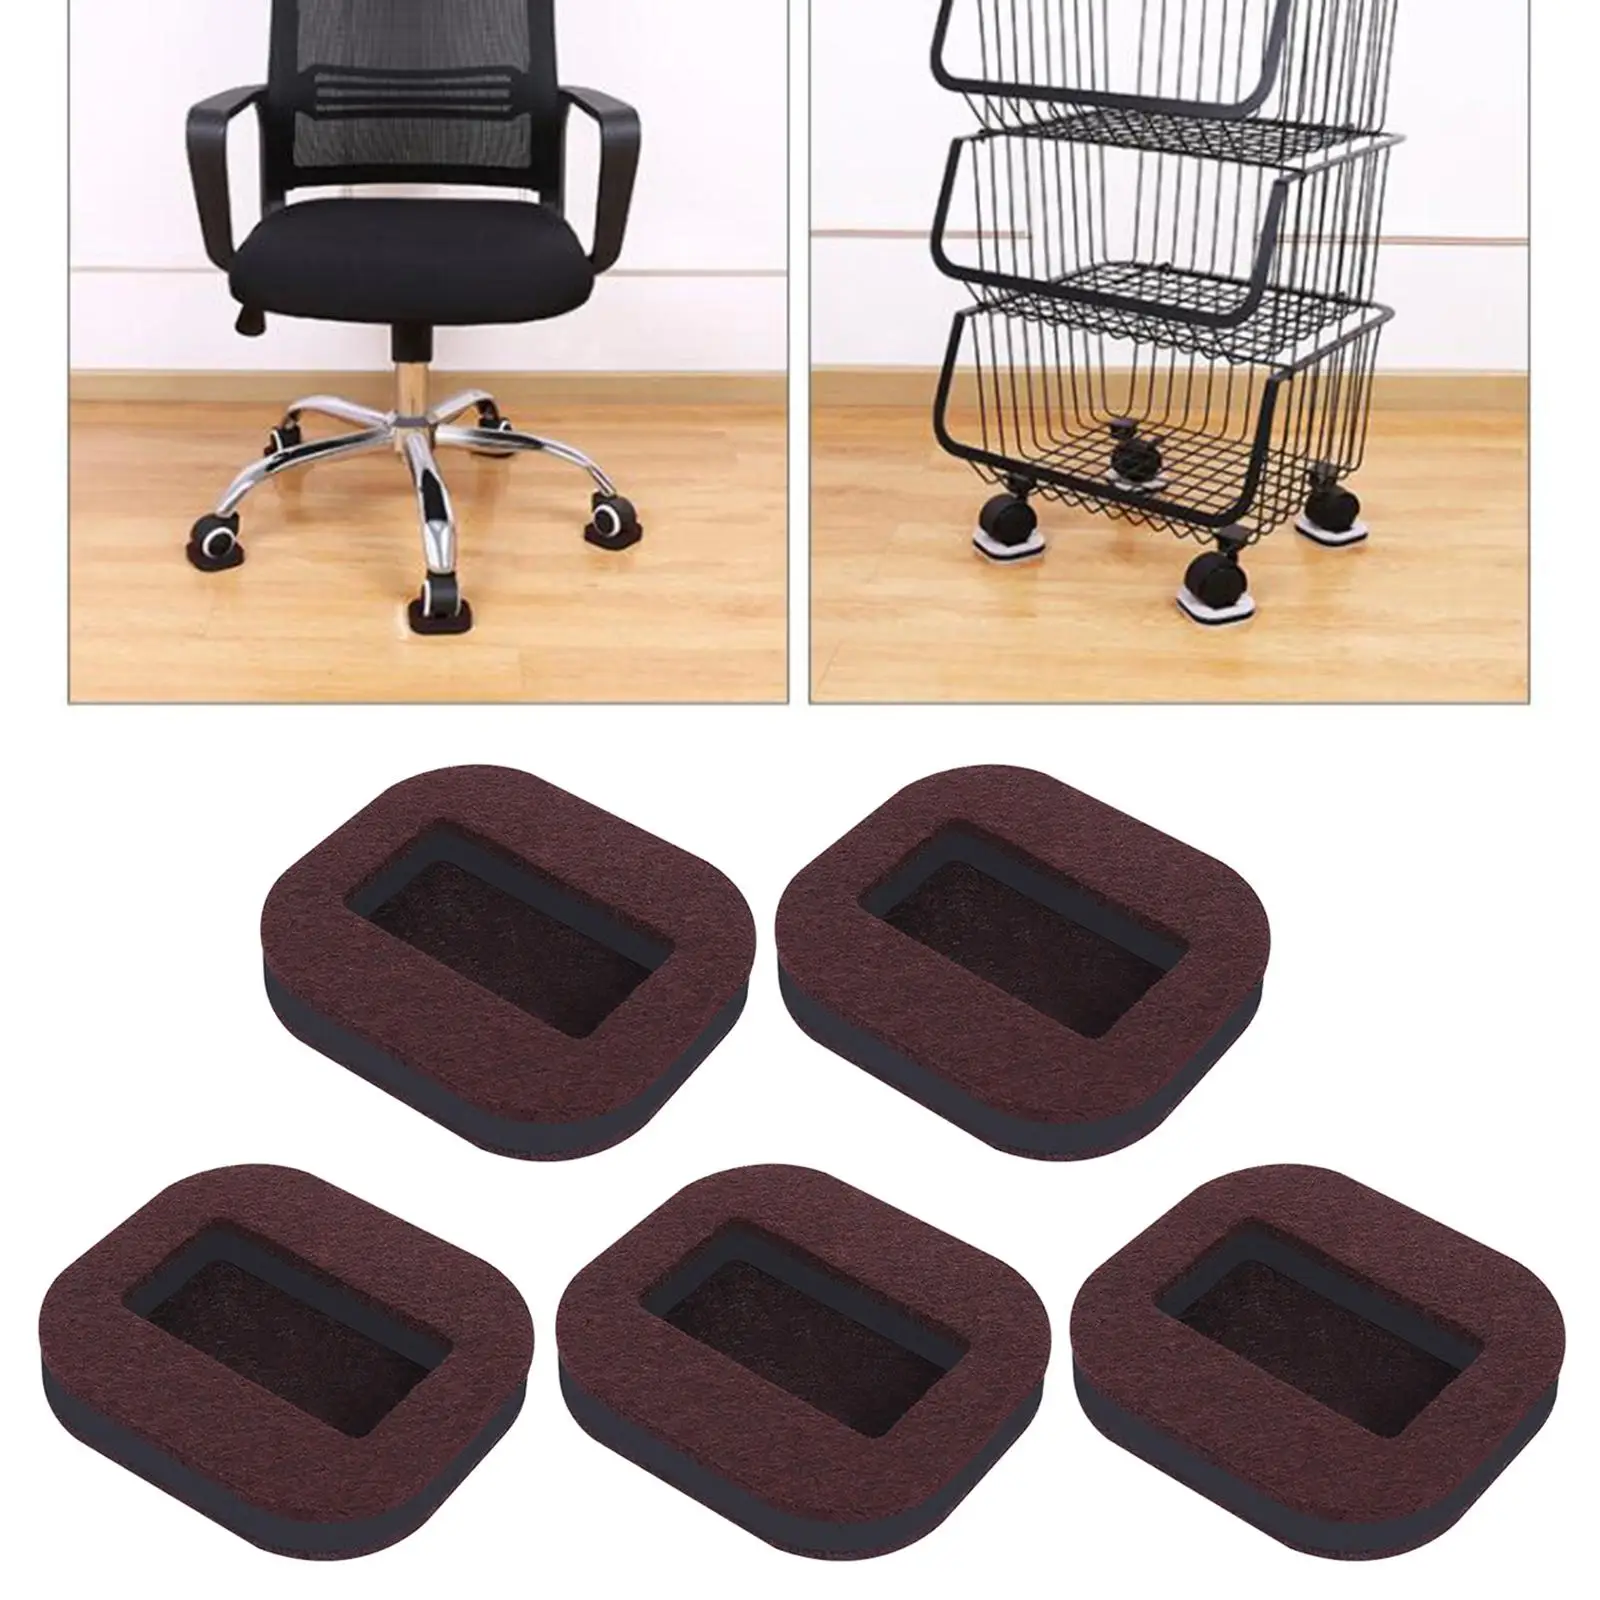 5x Furniture Cups Protect Any Flooring Wheel Fixing Pad Non-skid